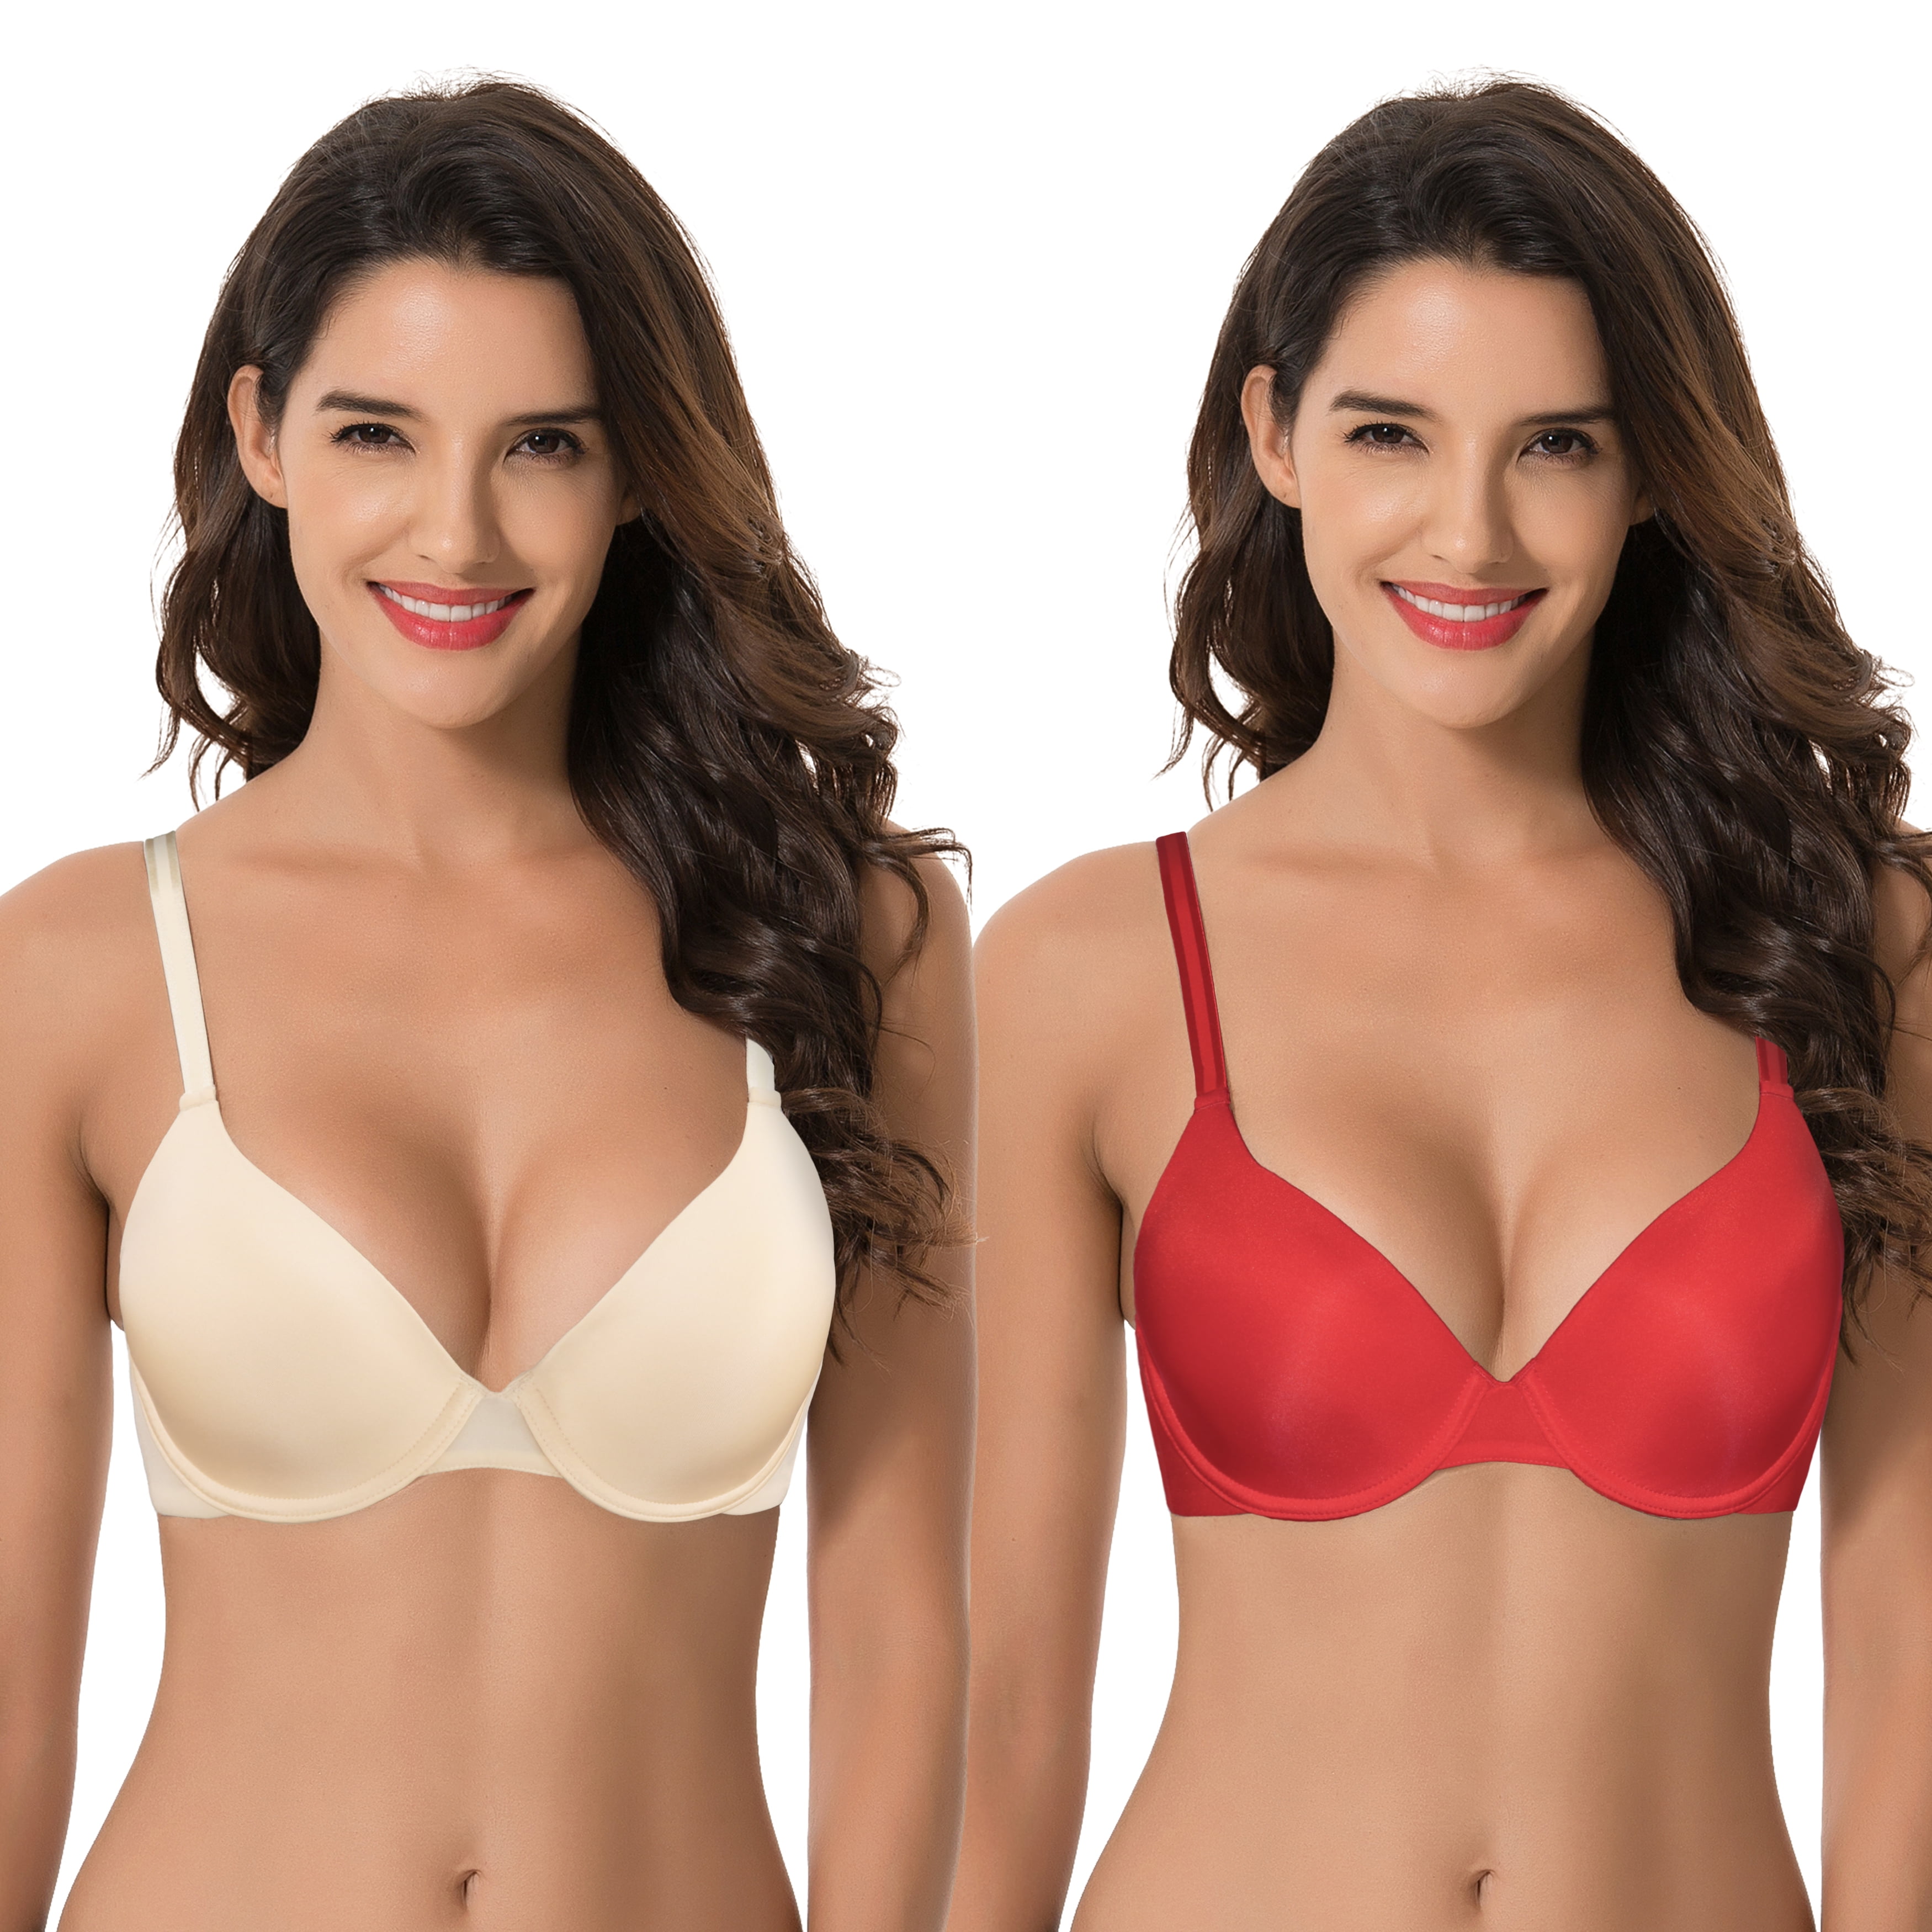 Curve Muse Women's Plus Size Full Coverage Padded Underwire Bra -2PK-NUDE,RED-48B 